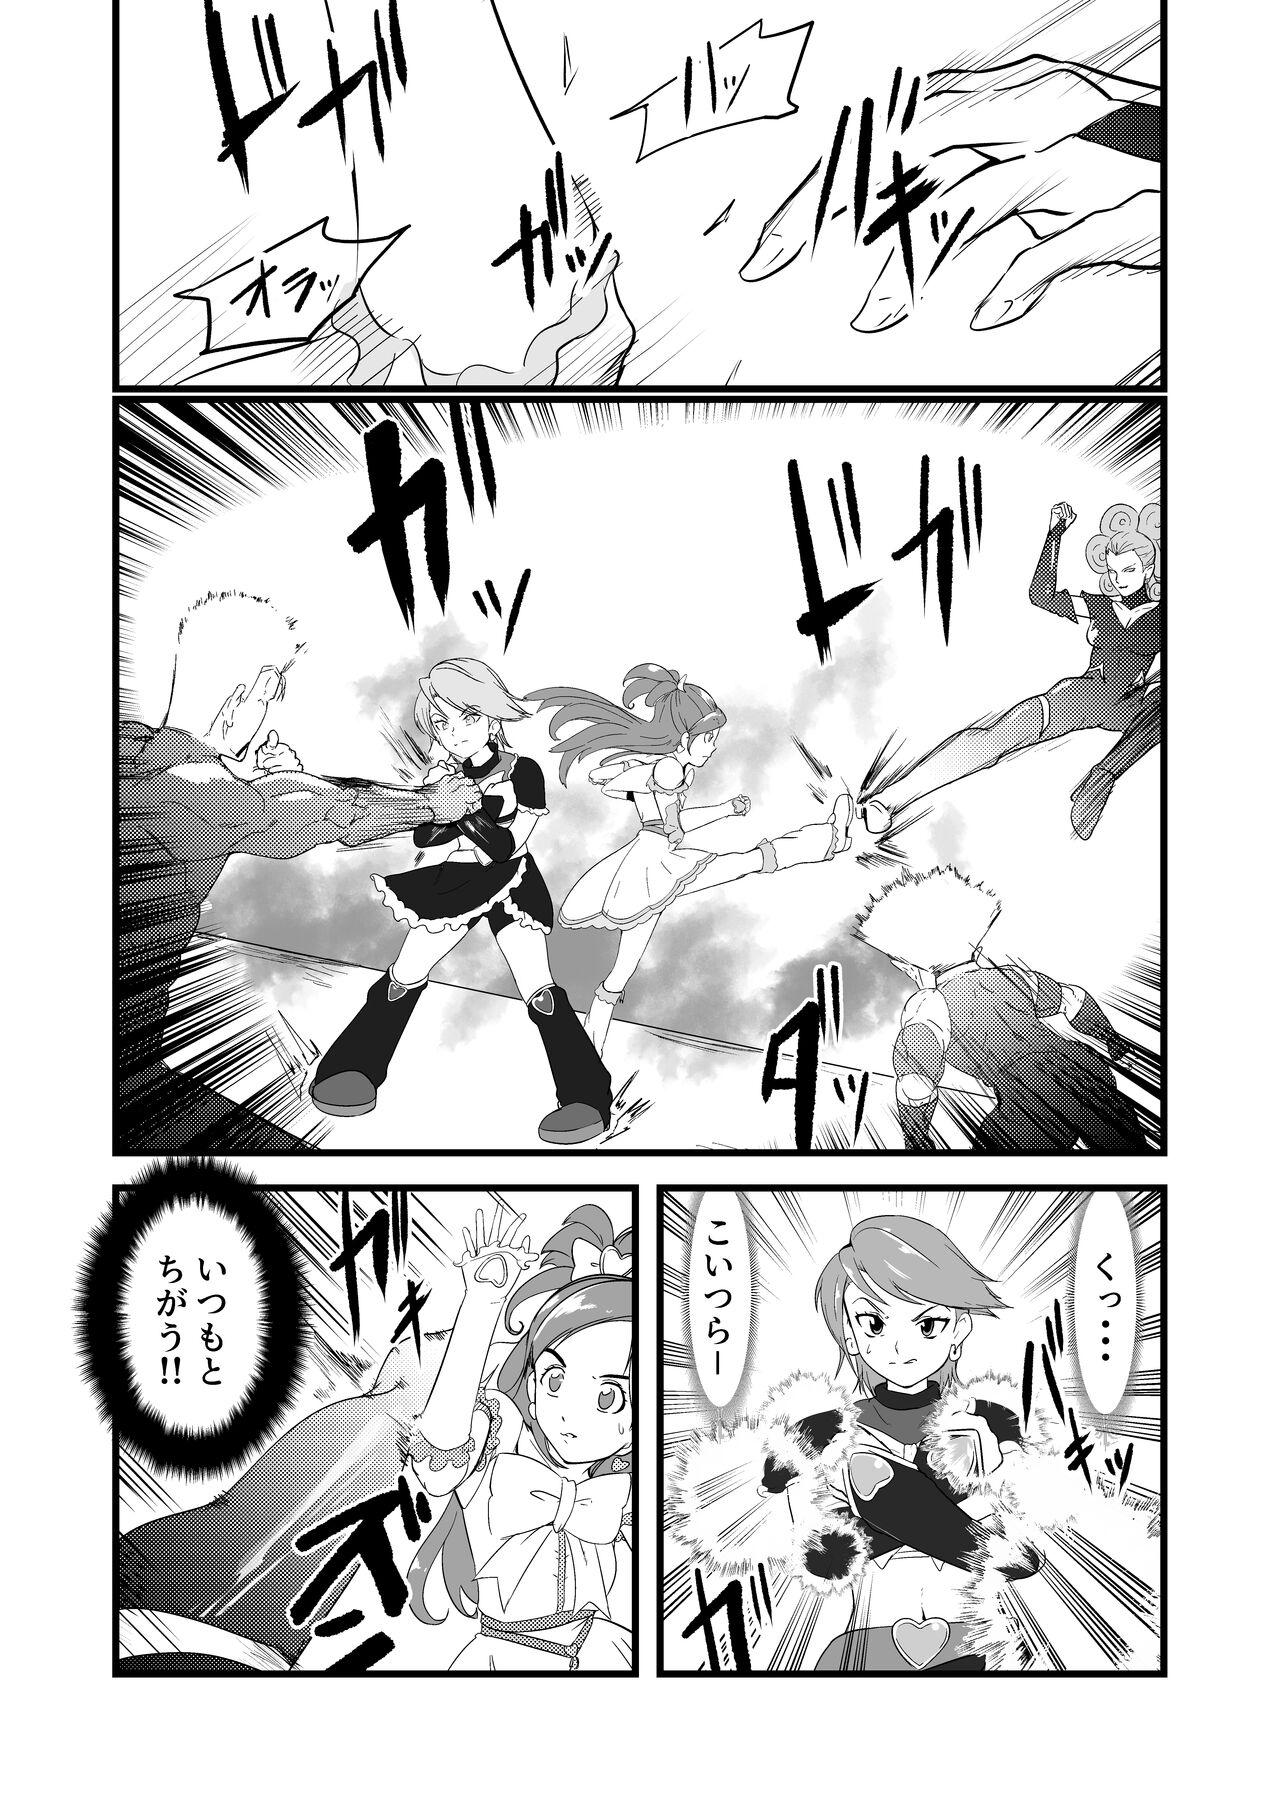 Magrinha Belly Crisis 7 - Pretty cure Pack - Page 1